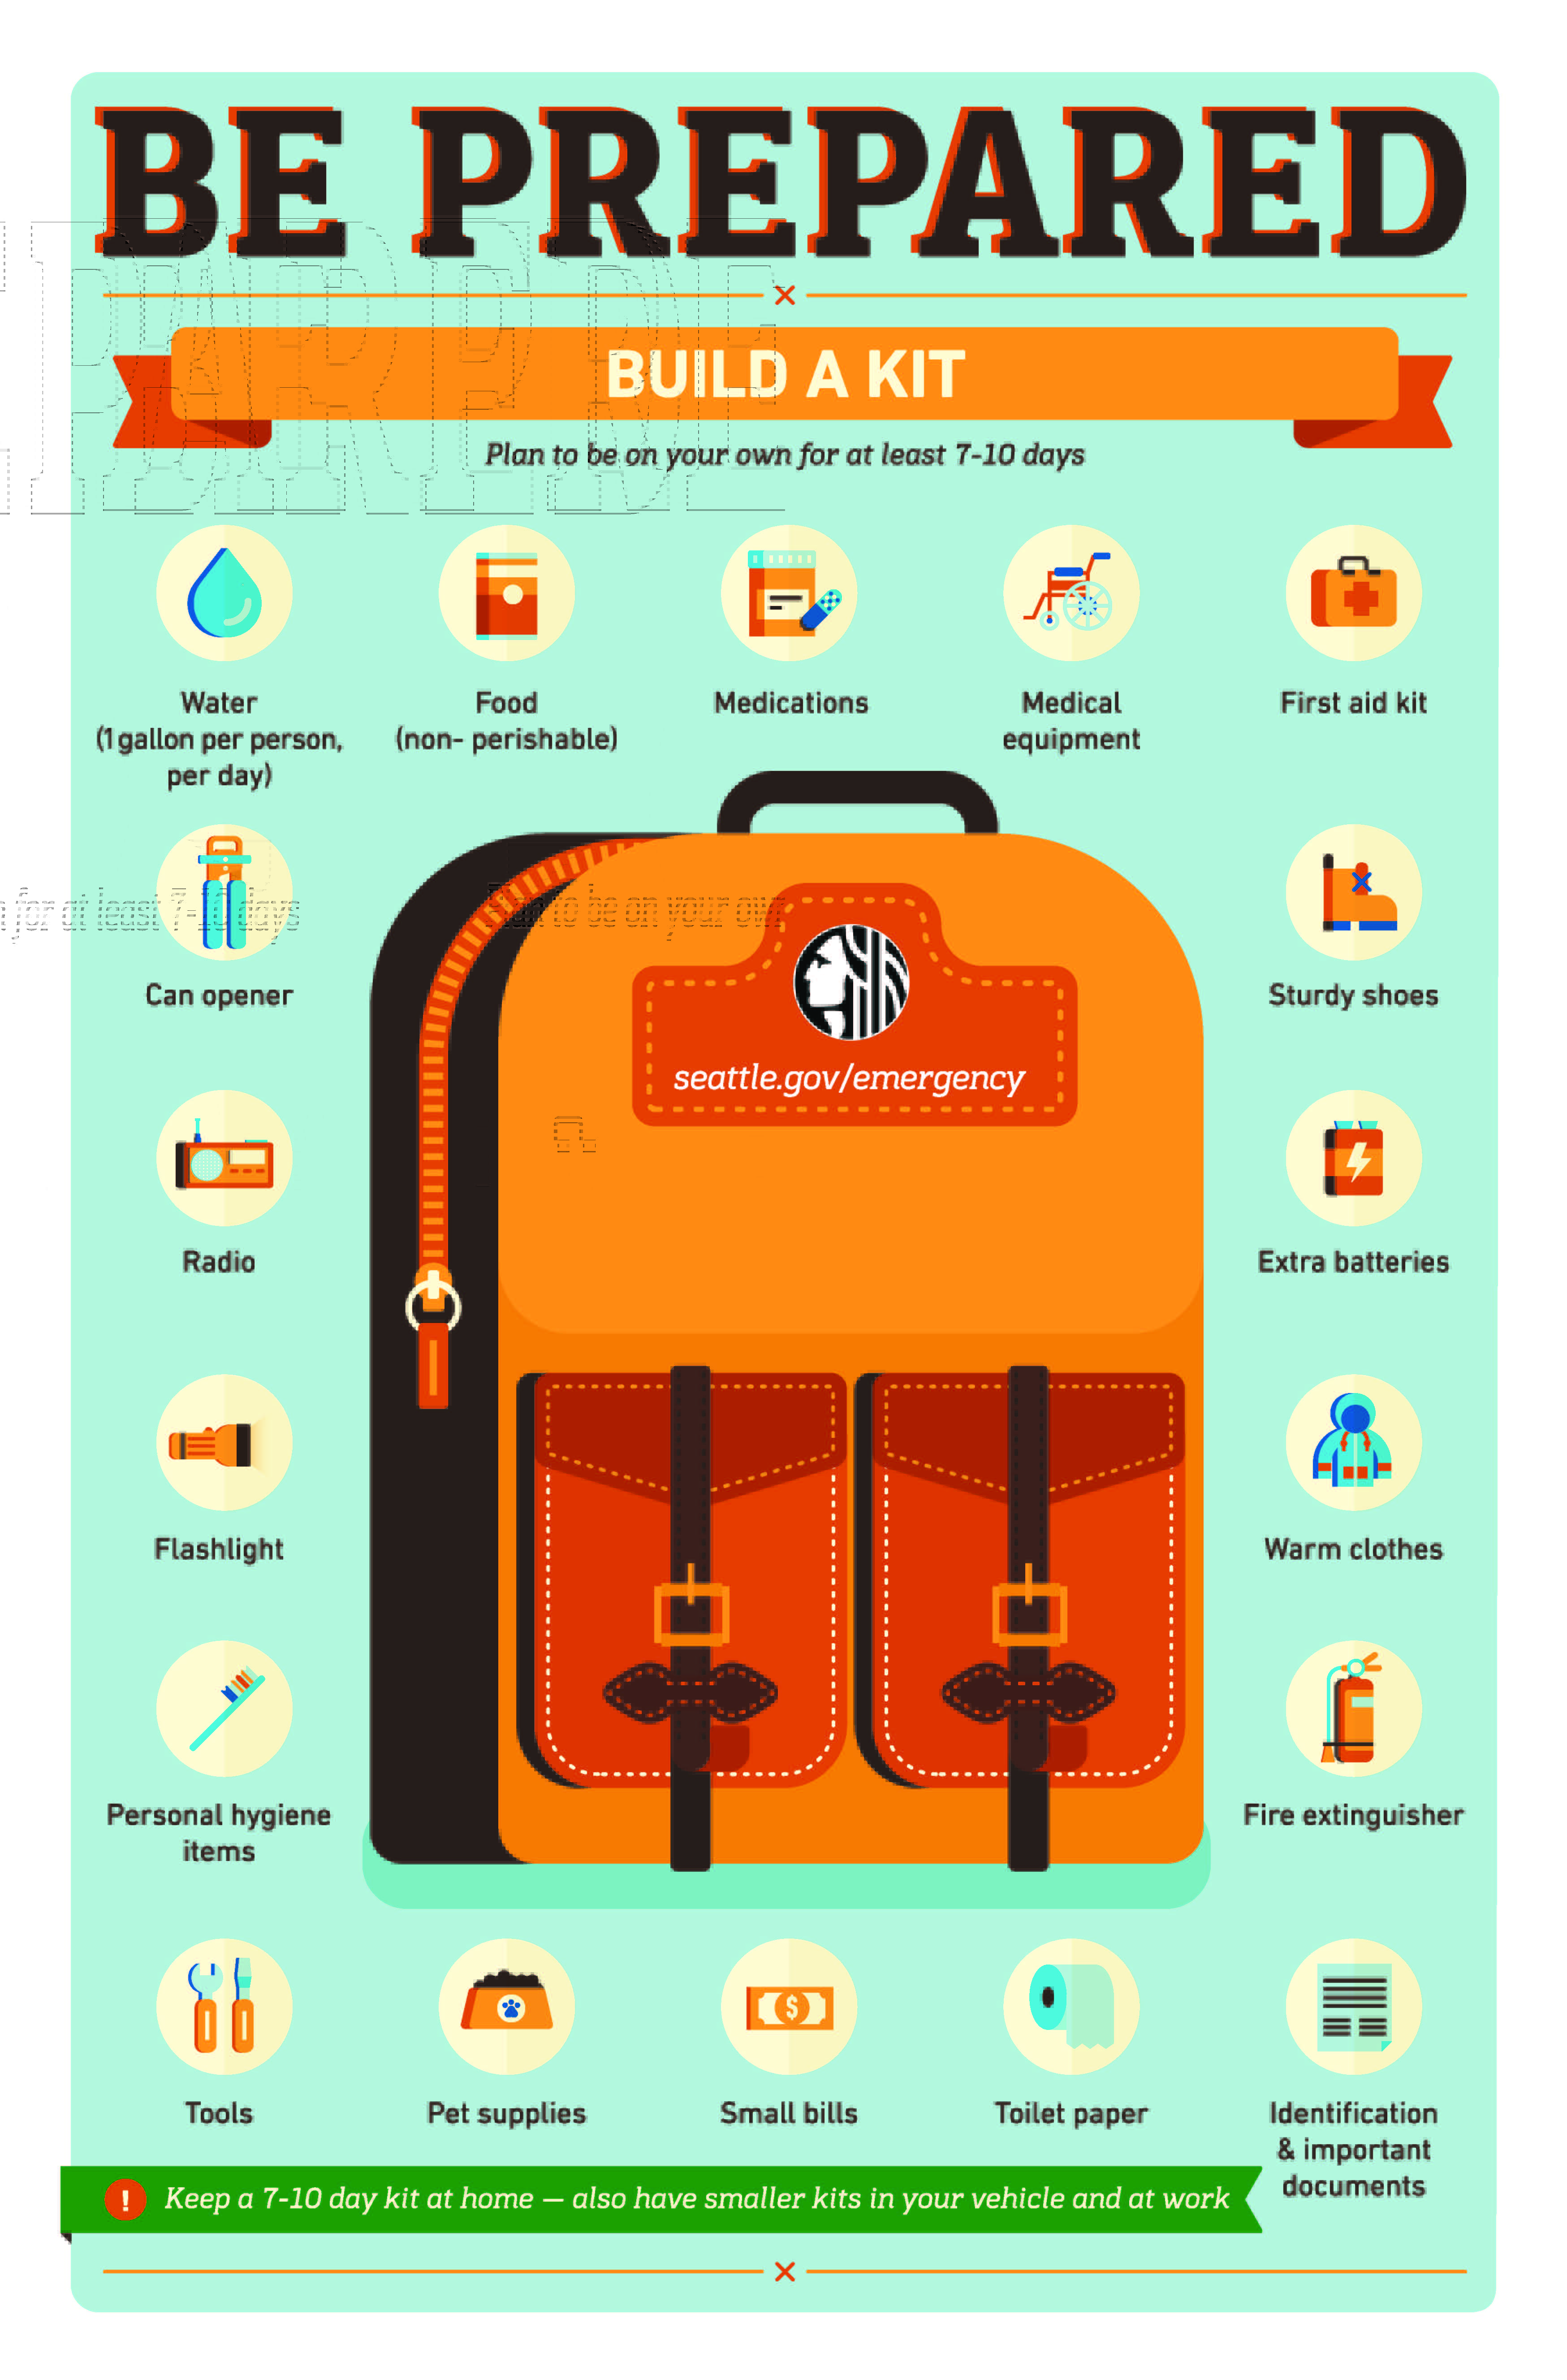 10 Essential Items for your Vehicle Emergency Kit